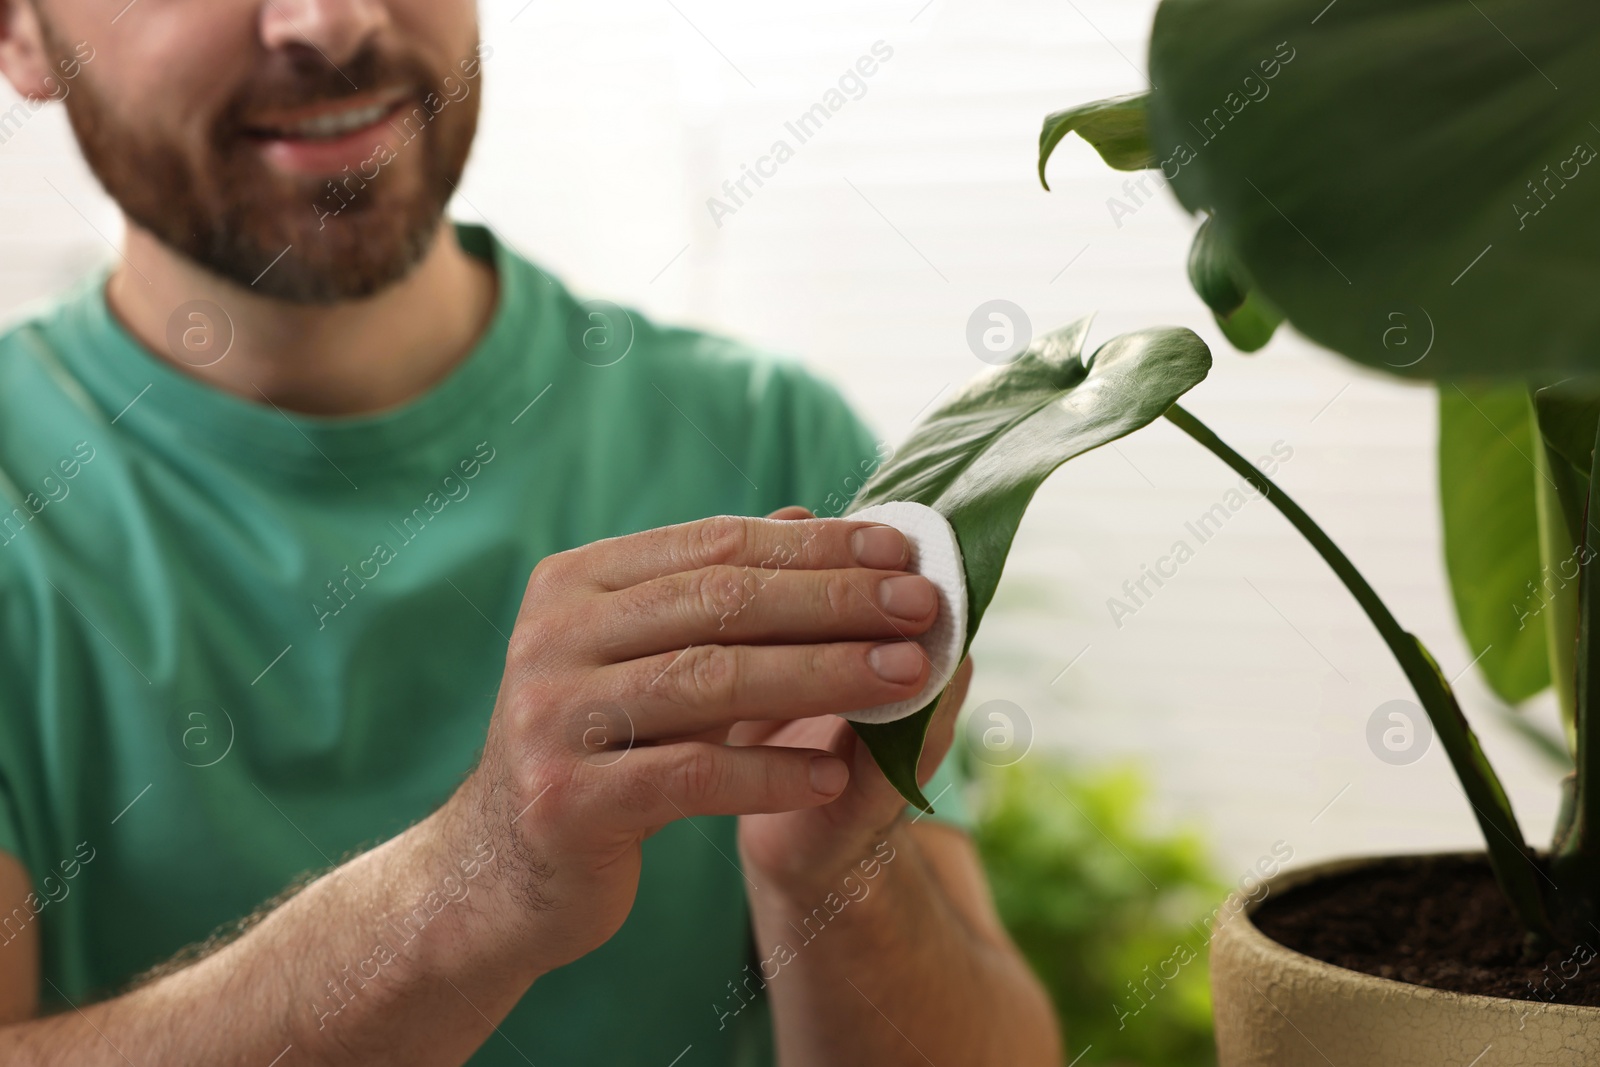 Photo of Man wiping leaves of beautiful potted houseplants with cotton pad indoors, closeup